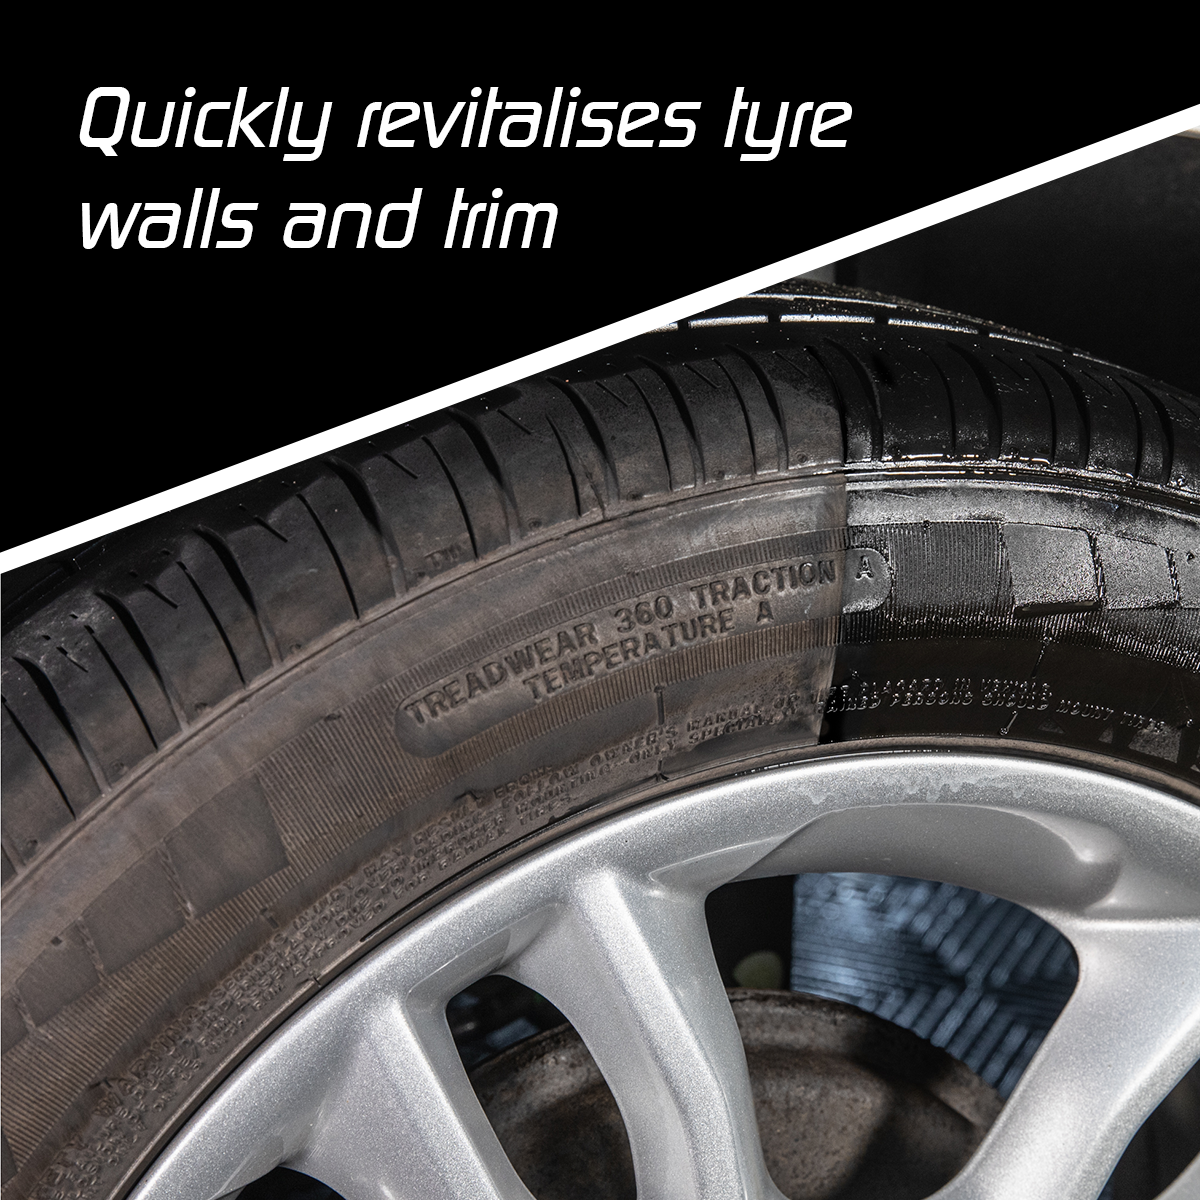 Quickly revitalises tyre walls and trim